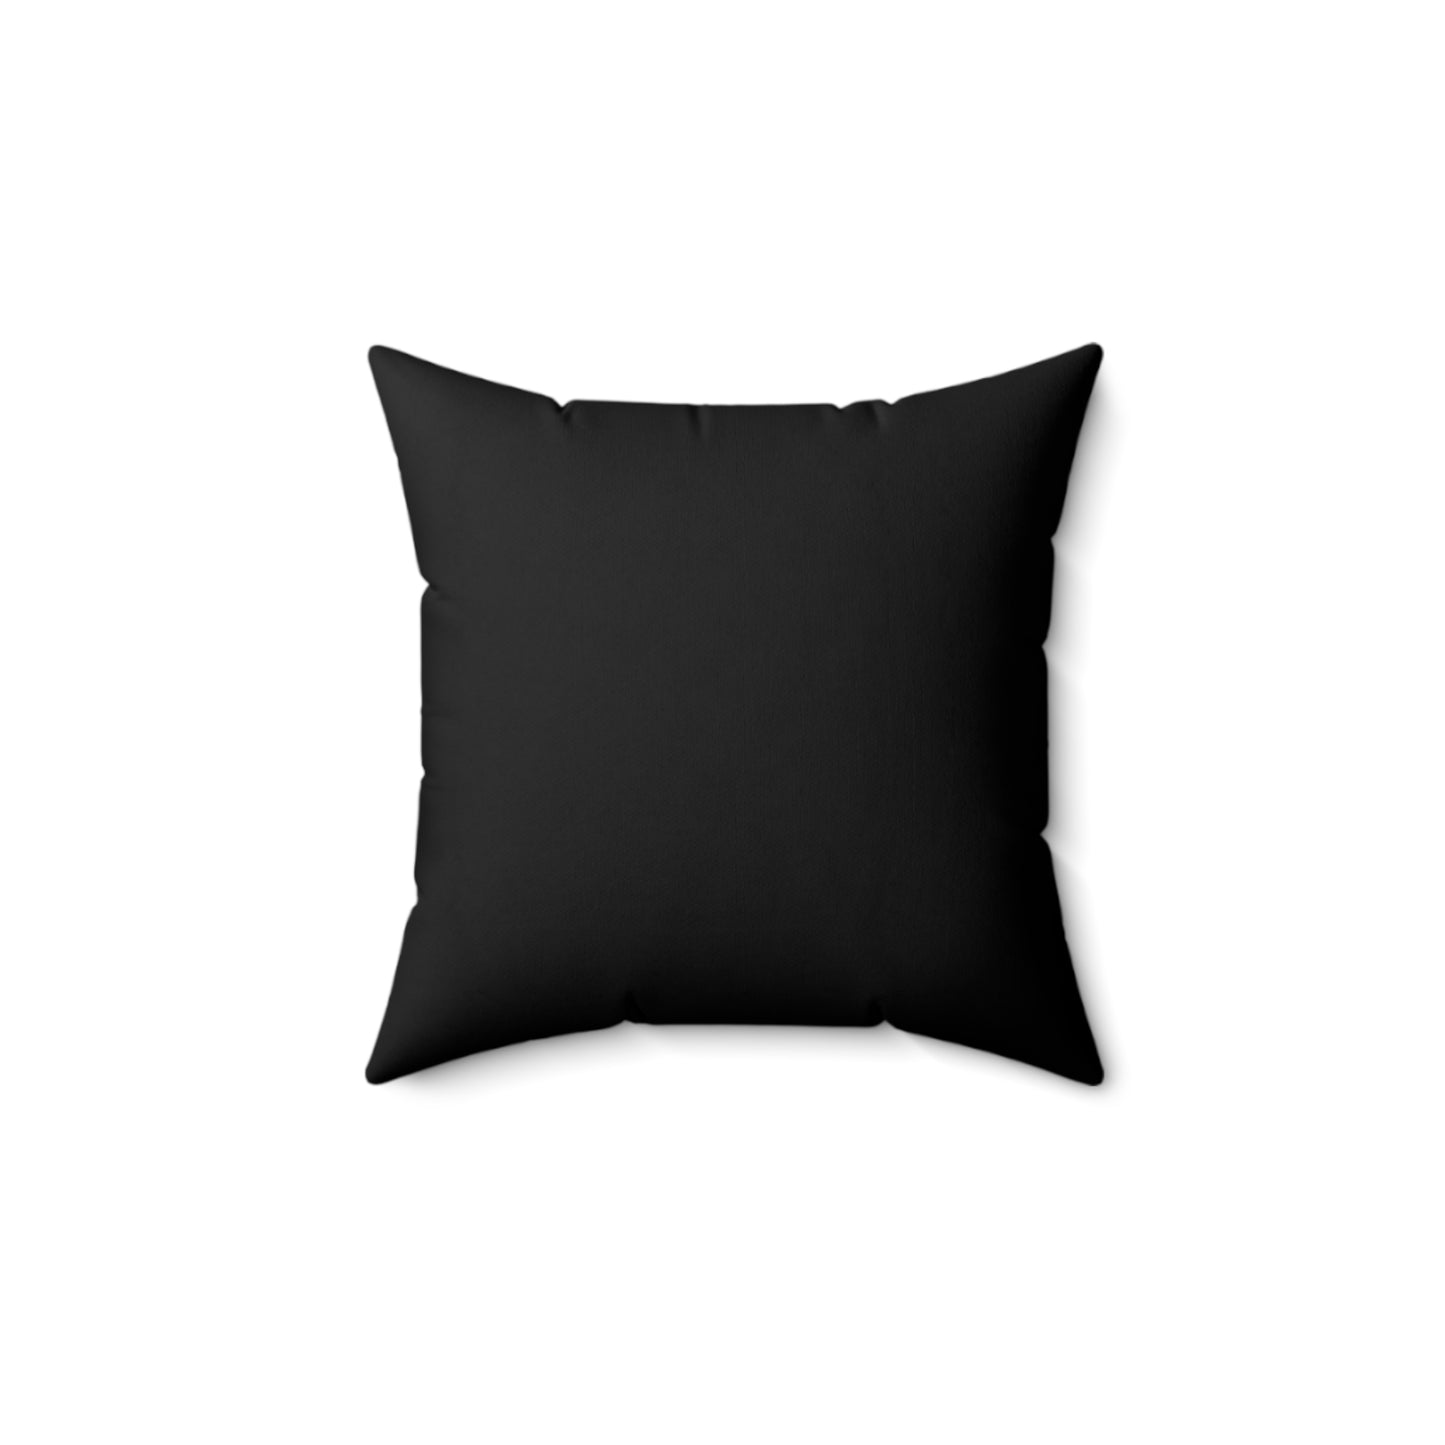 The Chaplain's Pillow, Black. Chaplain Gifts by Chaplain Life®